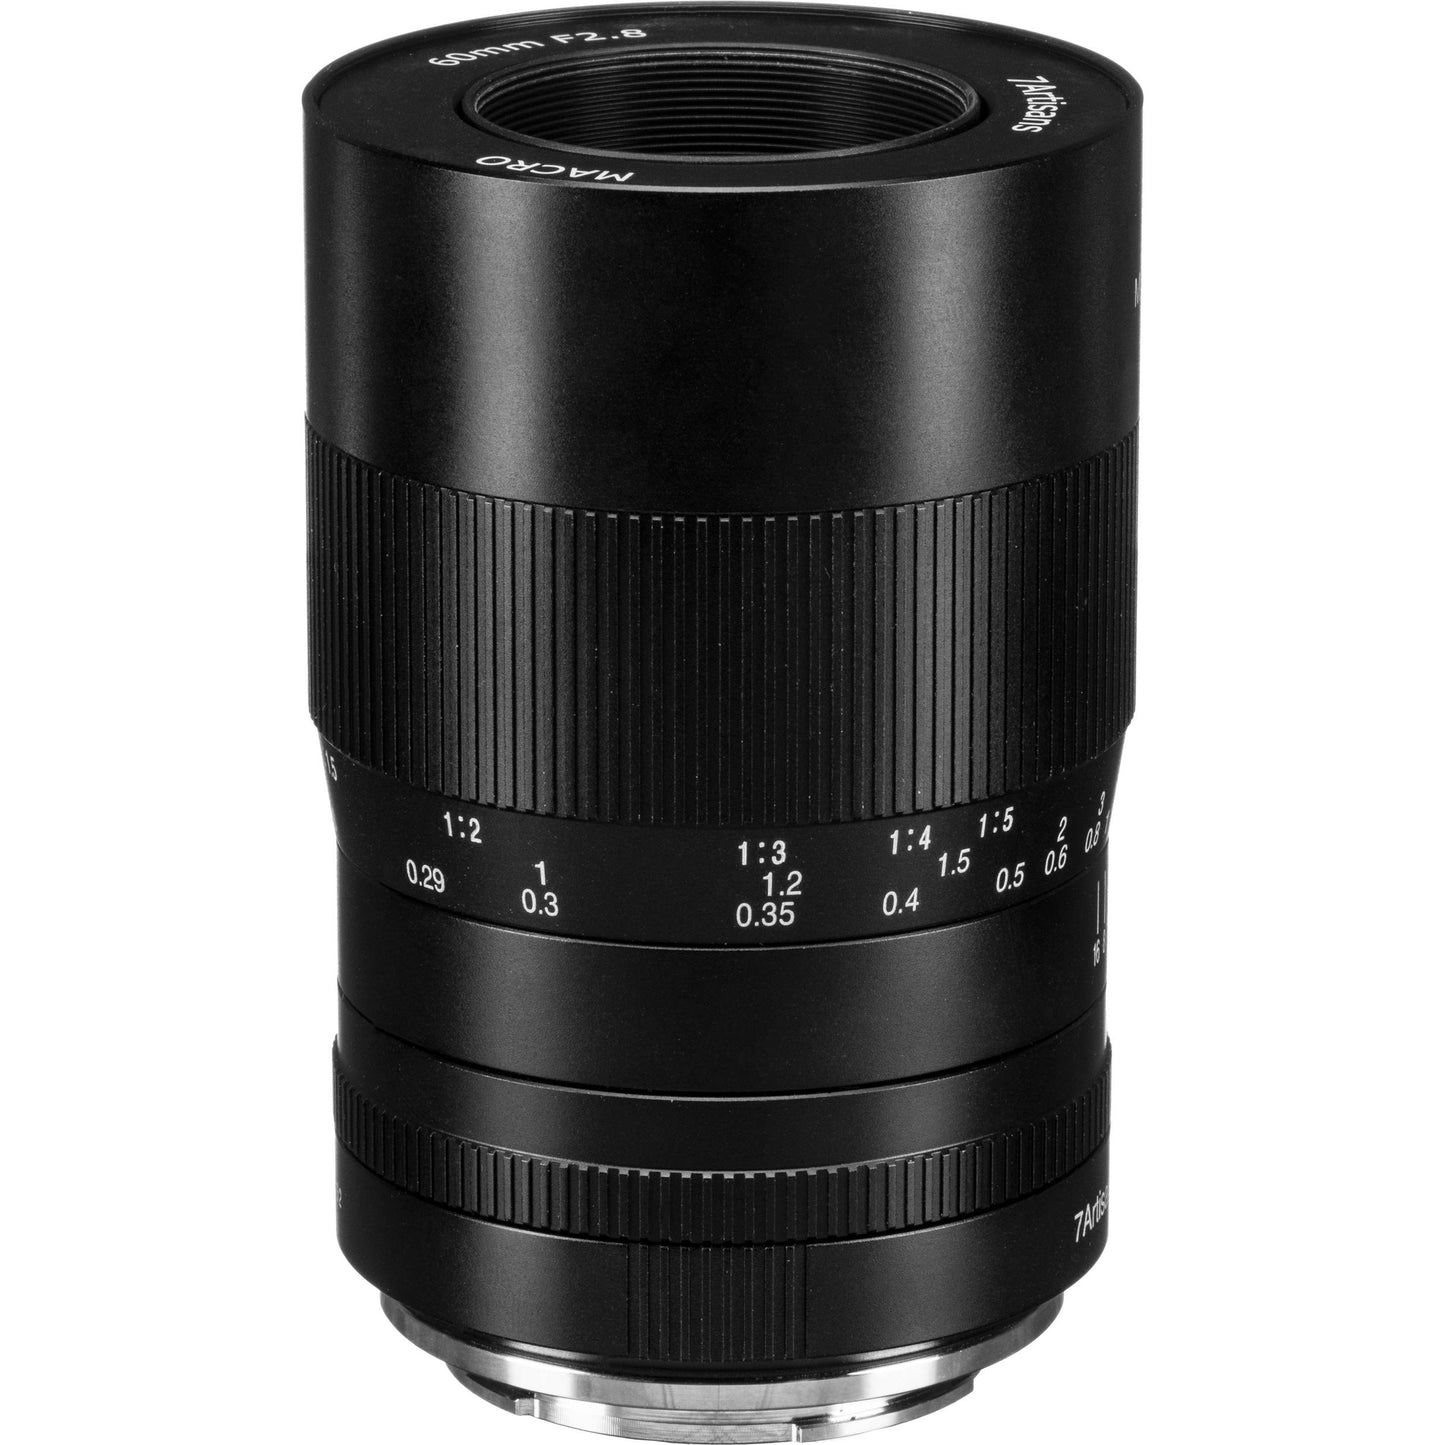 7Artisans 60mm f2.8 APS-C Manual Macro Photoelectric Prime Lens (E-Mount) for Sony Mirrorless Cameras